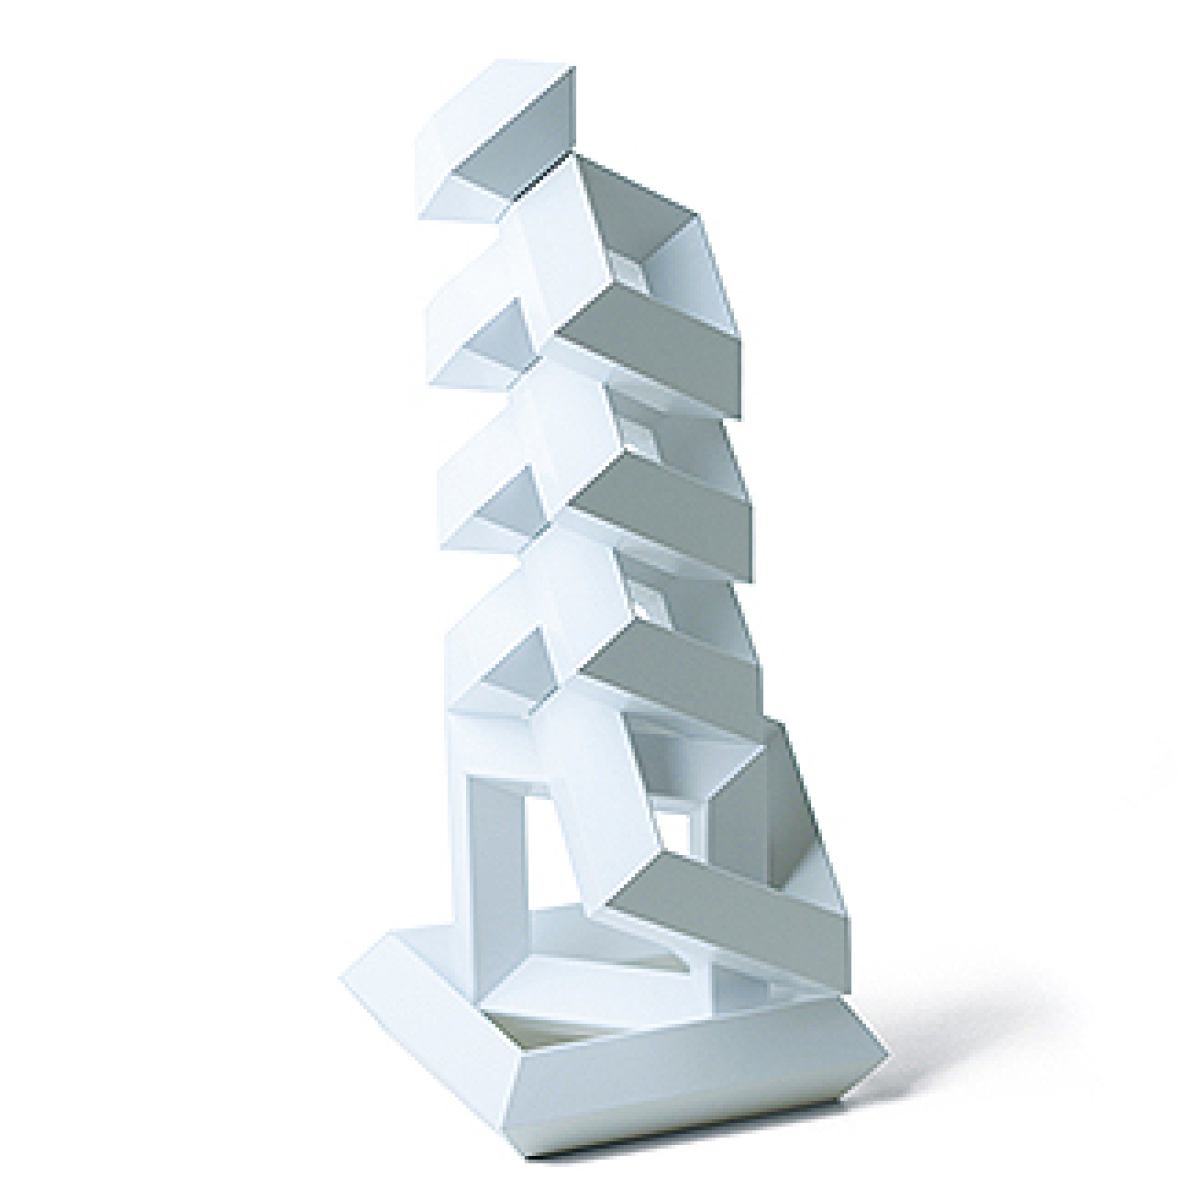 Diamant (White) – Original Construction Game by Naef, made of Wood